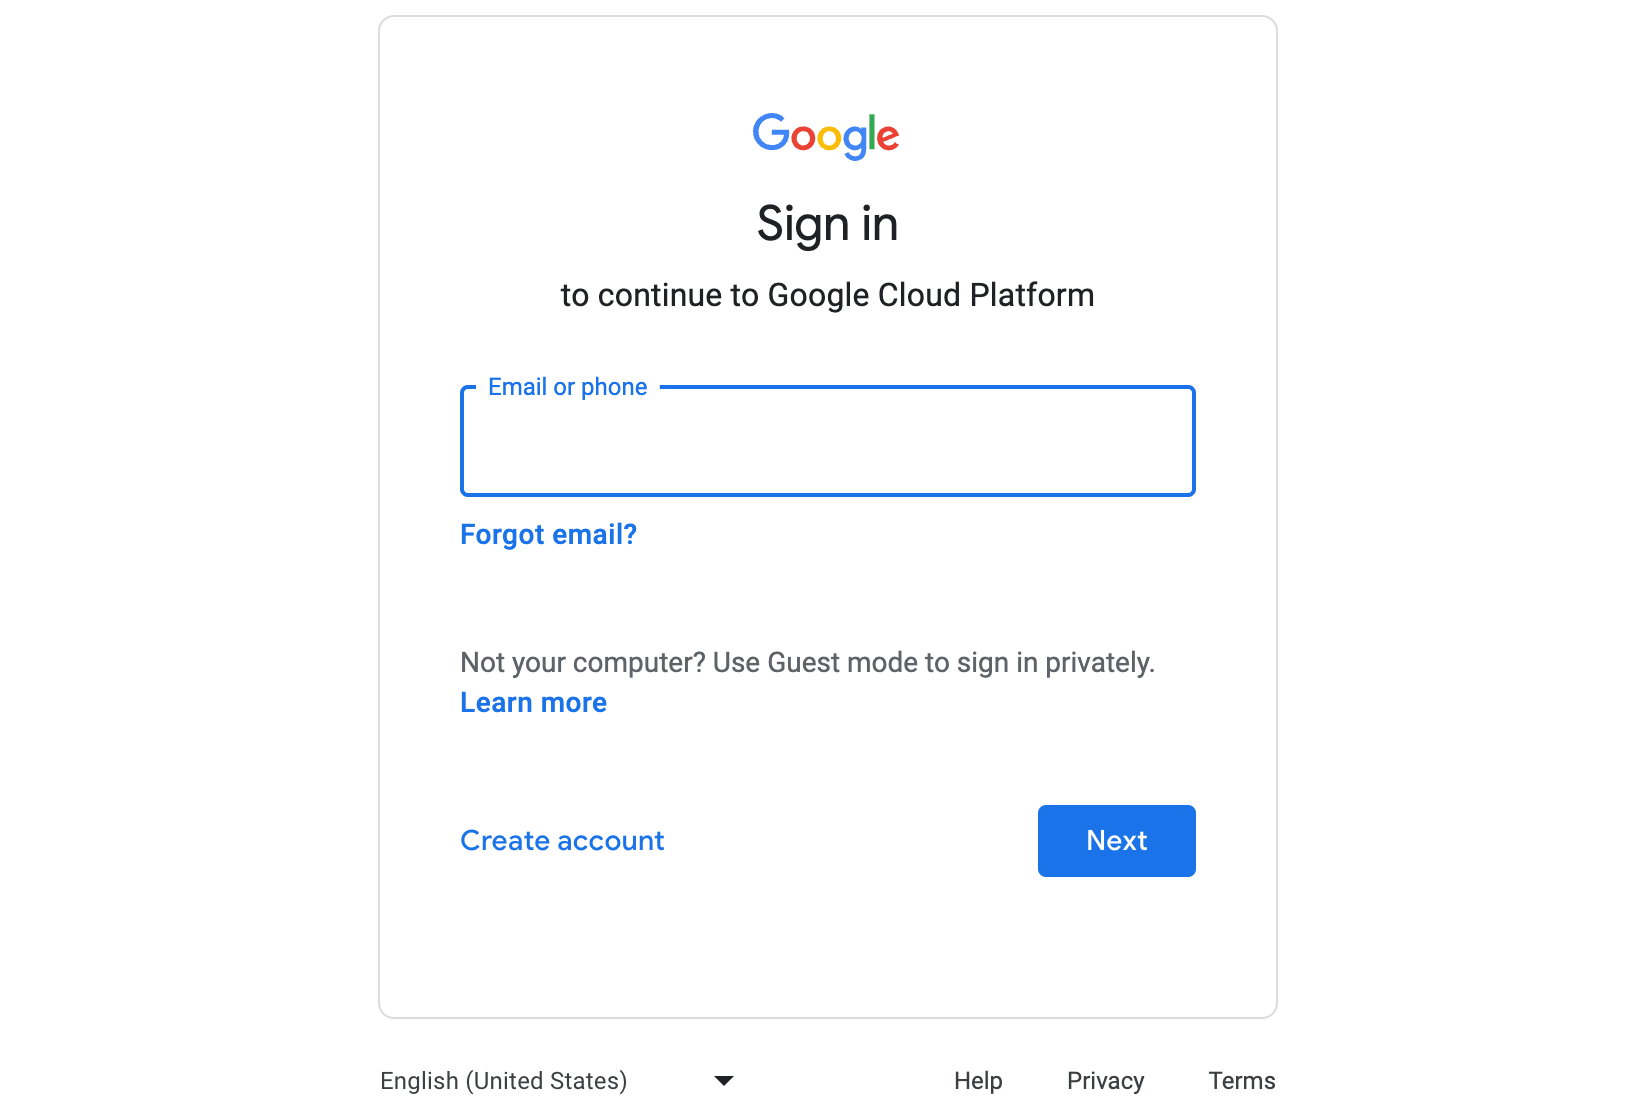 The sign in page for Google Cloud Platform. The "Email or phone" box is selected and ready for user input. In the lower left is a "Next" button.